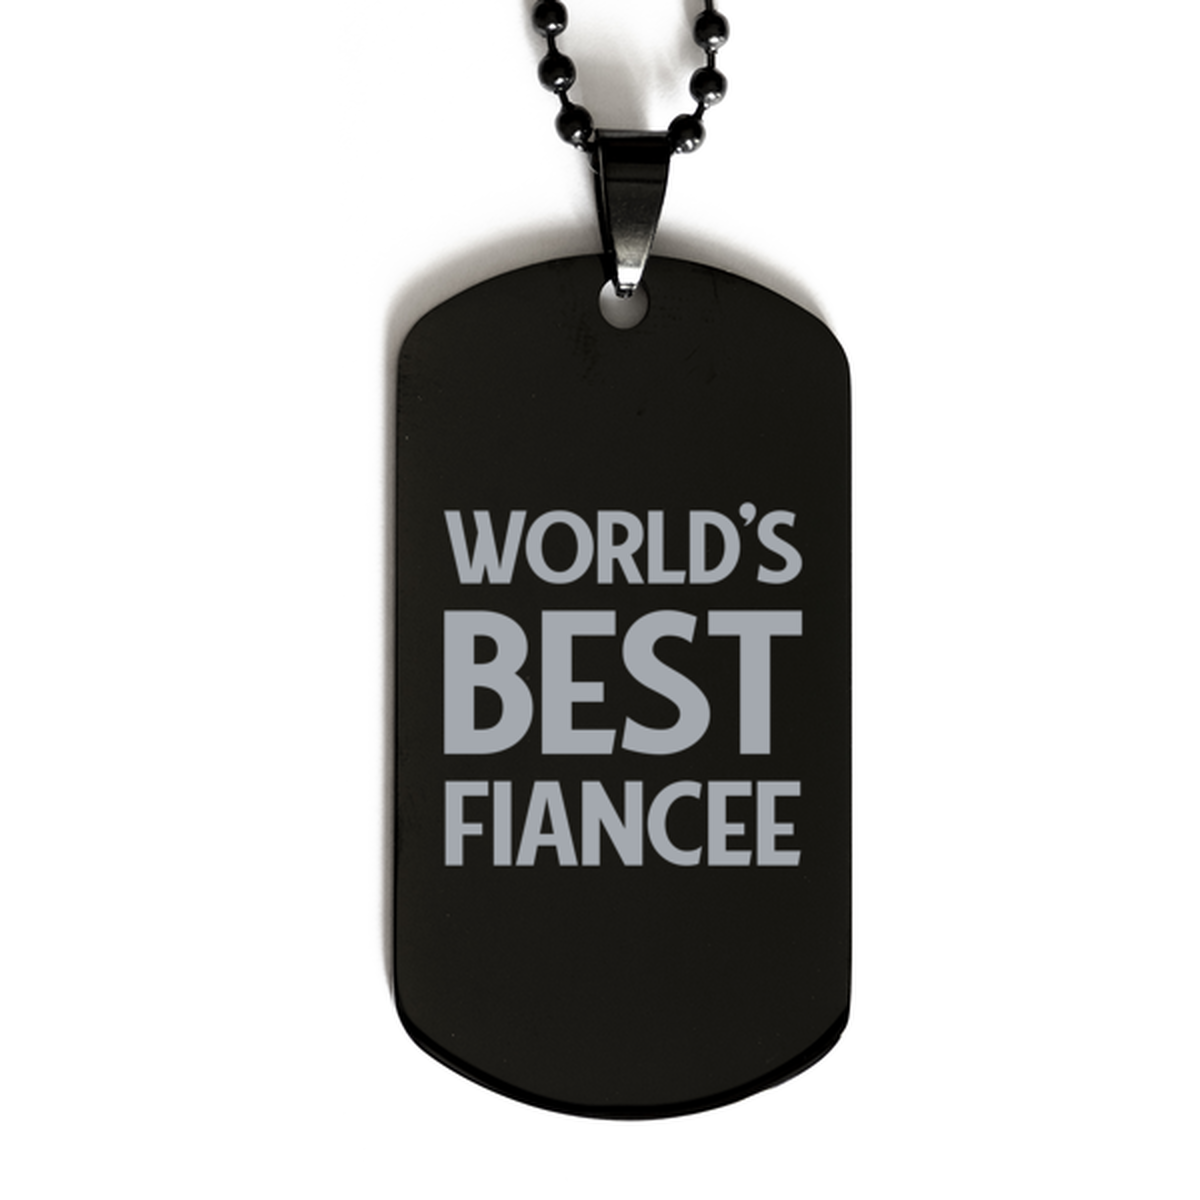 Worlds Best Fiancee Gifts, Funny Black Engraved Dog Tag For Fiancee, Birthday Presents For Women